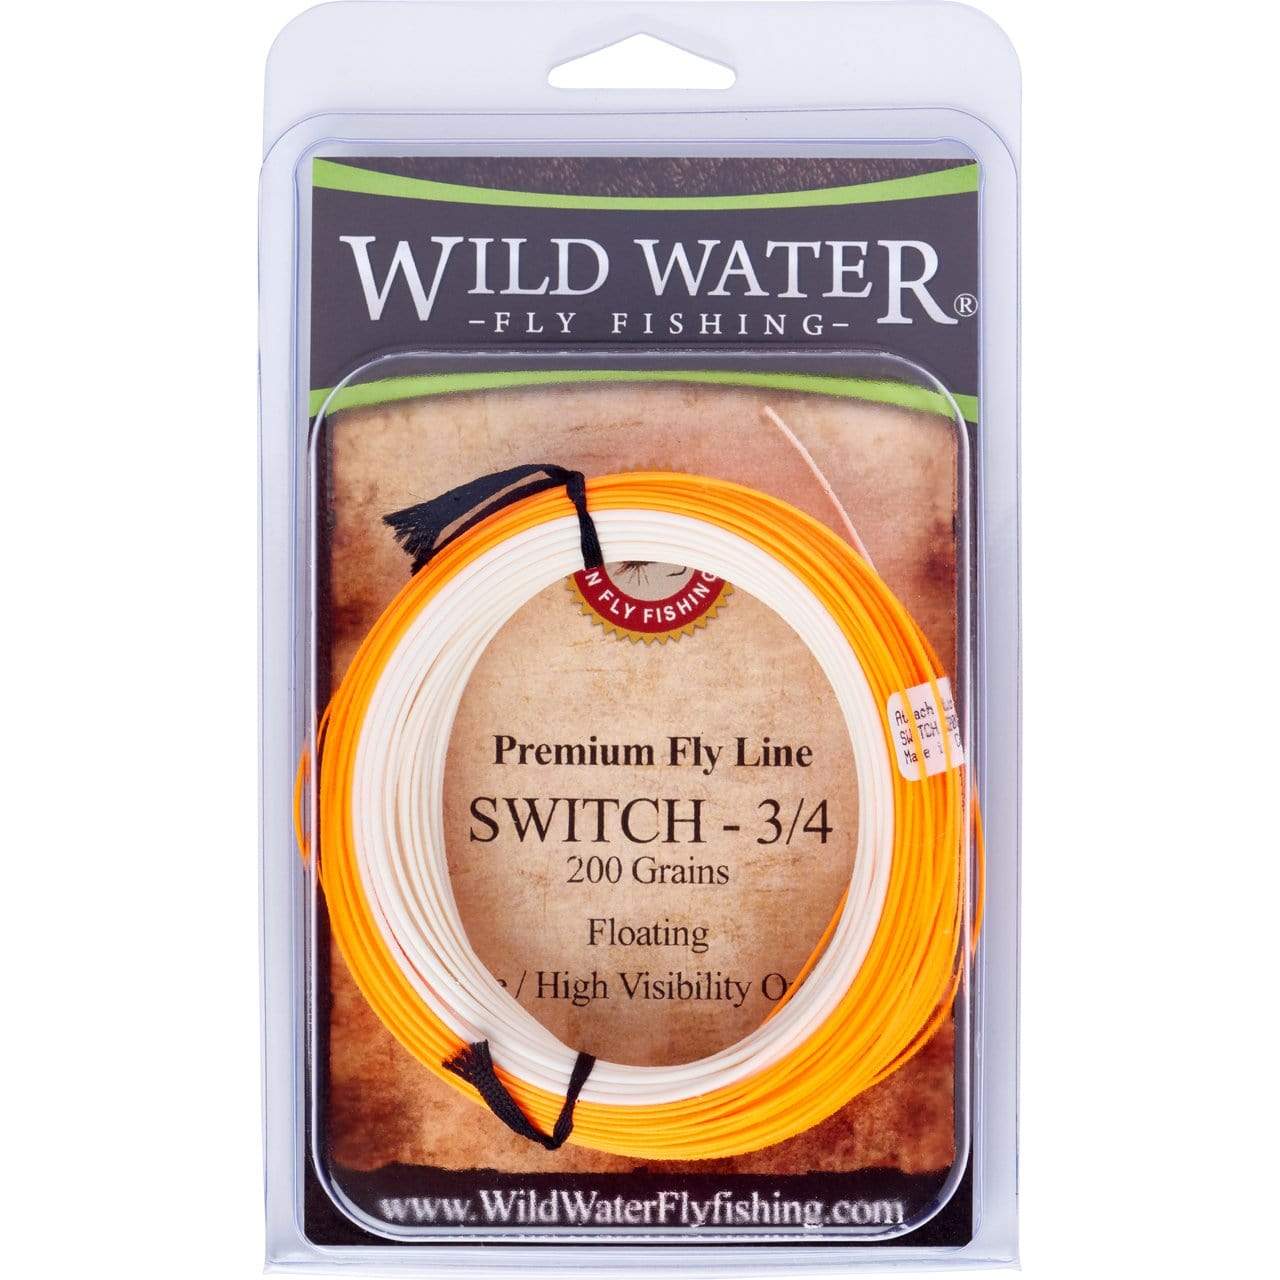 Wild Water Fly Fishing 3/4F Switch Line, 200 grains